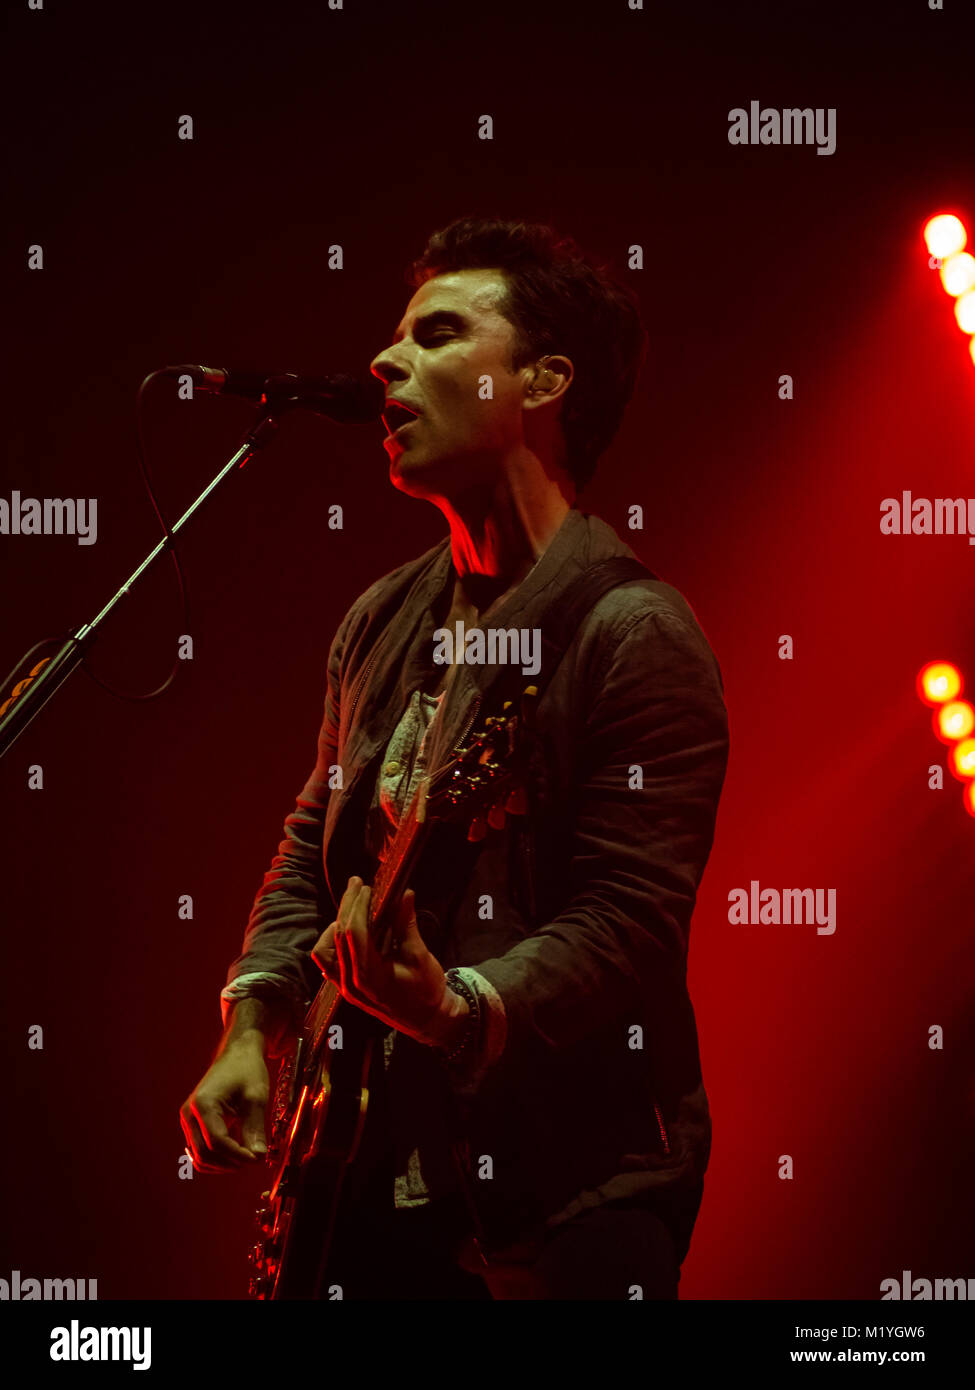 Kelly Jones of the Rock band The Stereophonics performs live on stage Stock Photo